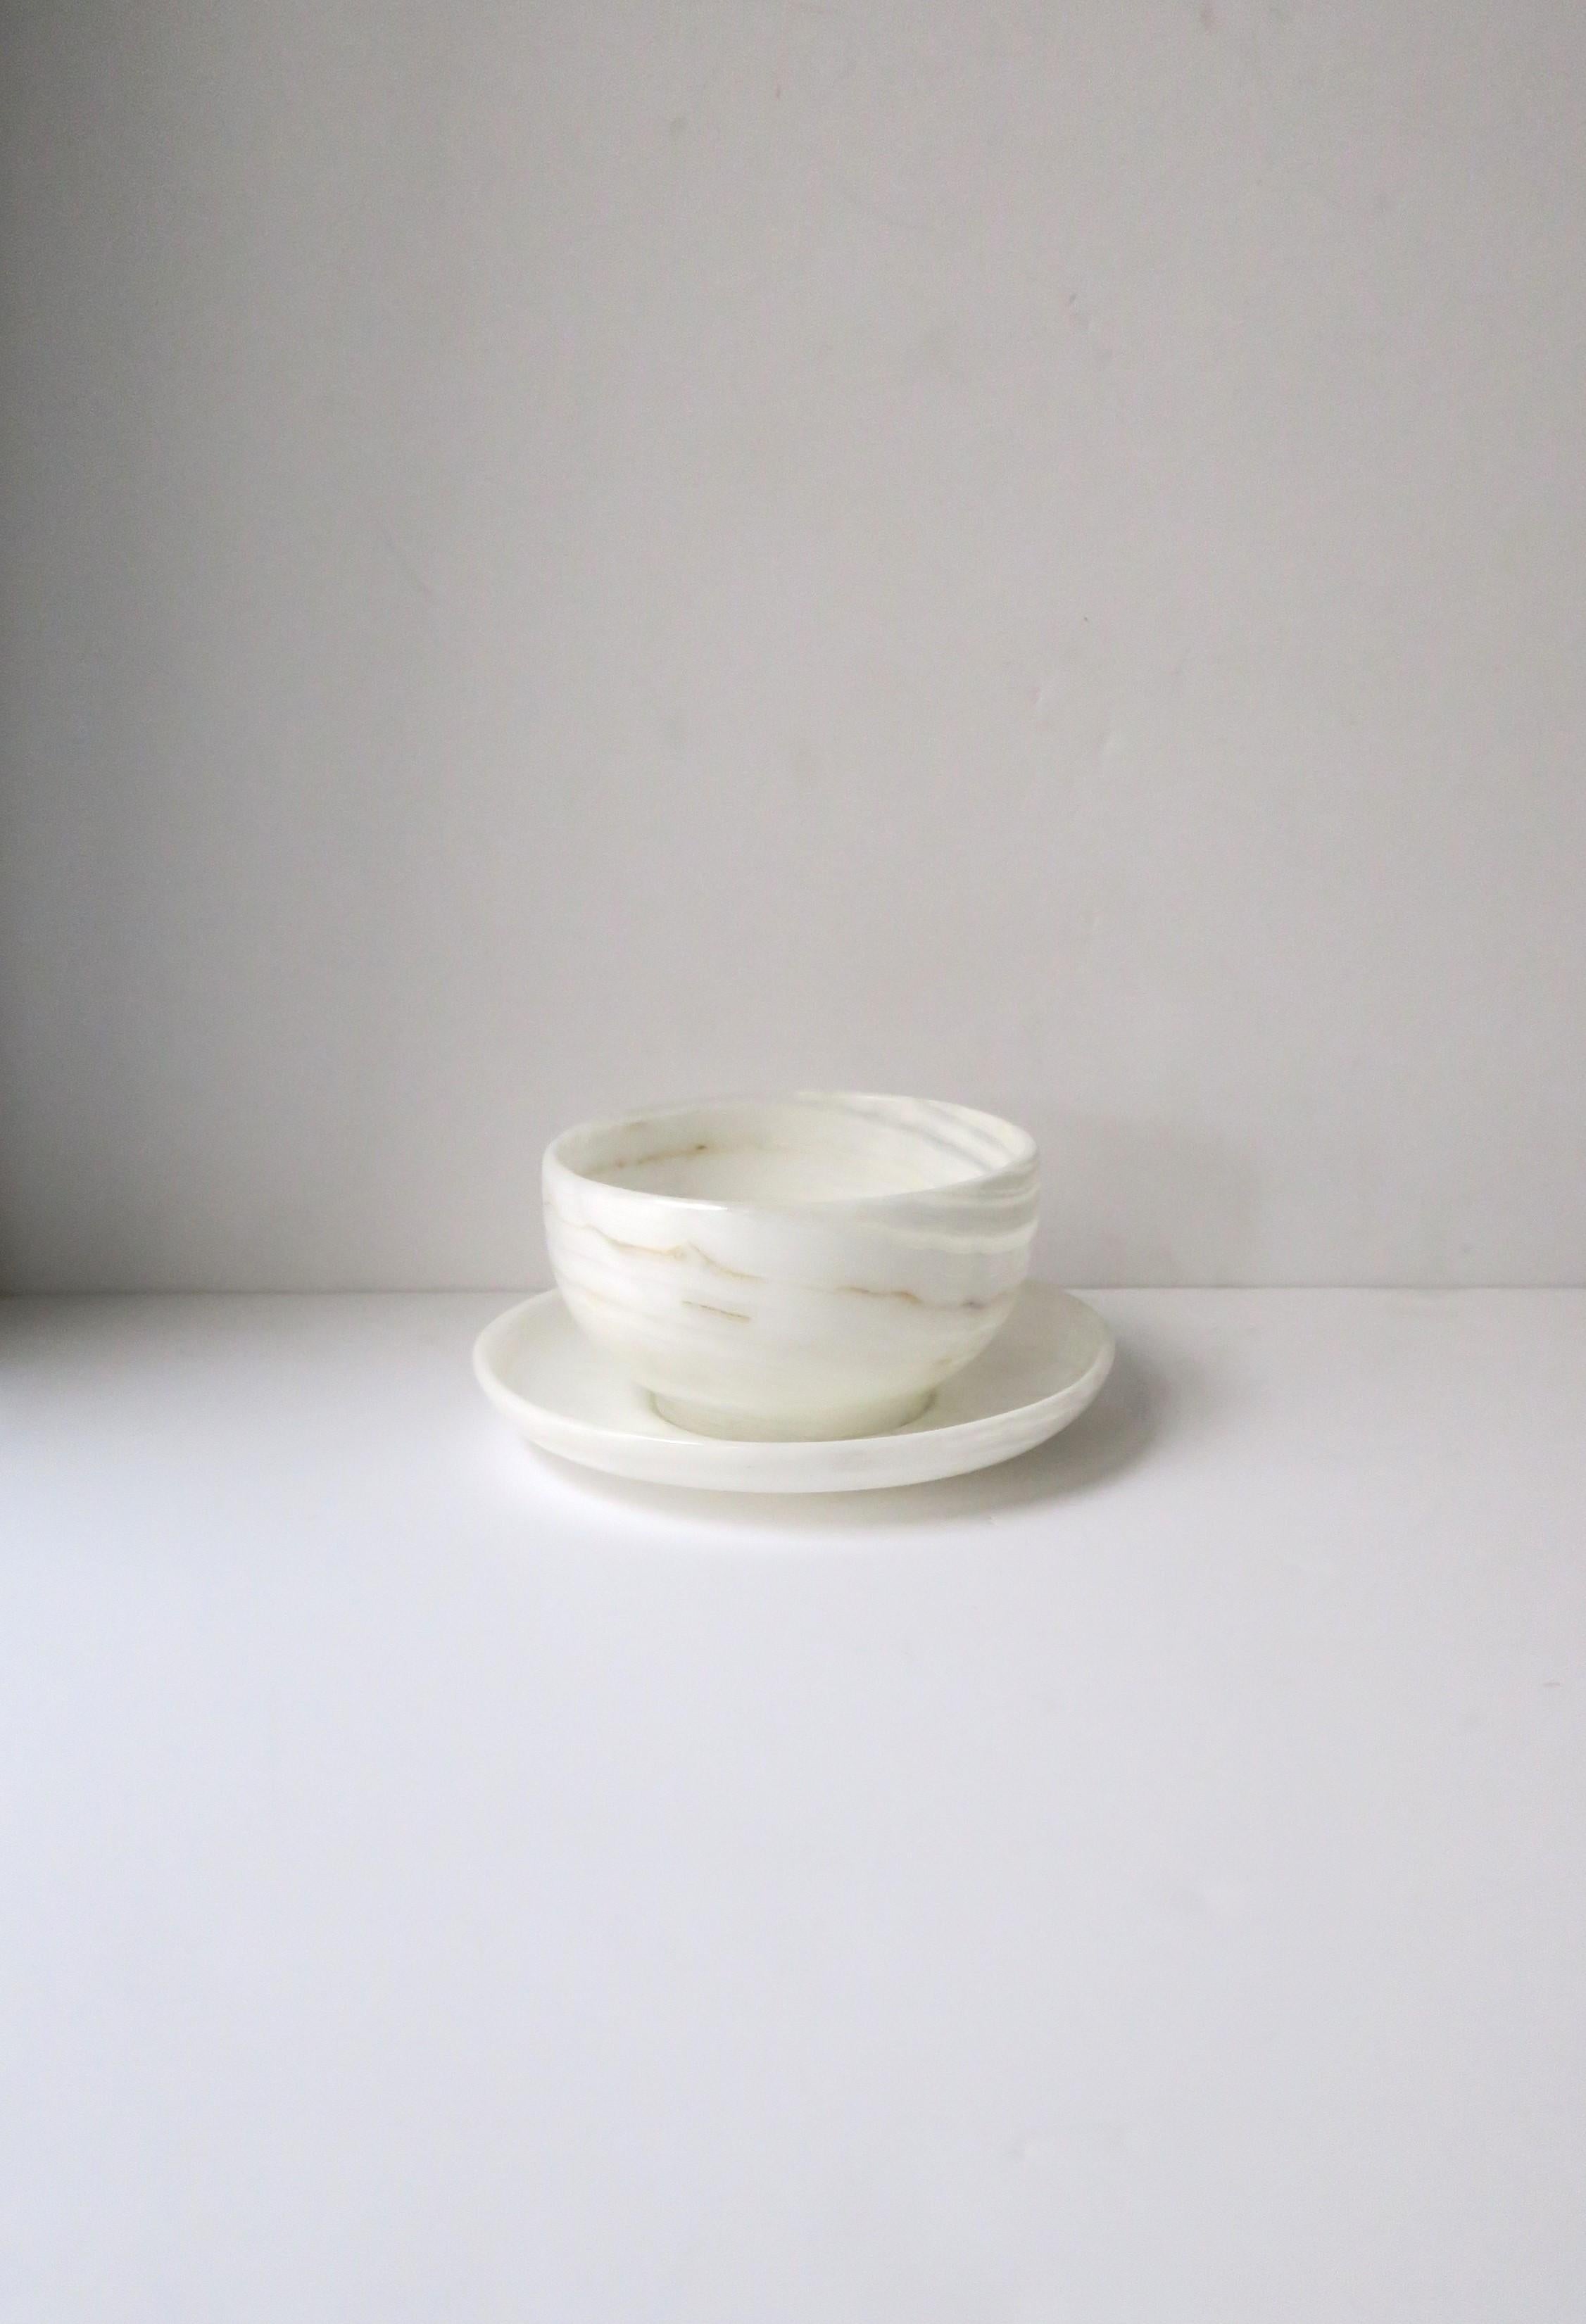 Minimalist White Onyx Marble Bowl and Saucer